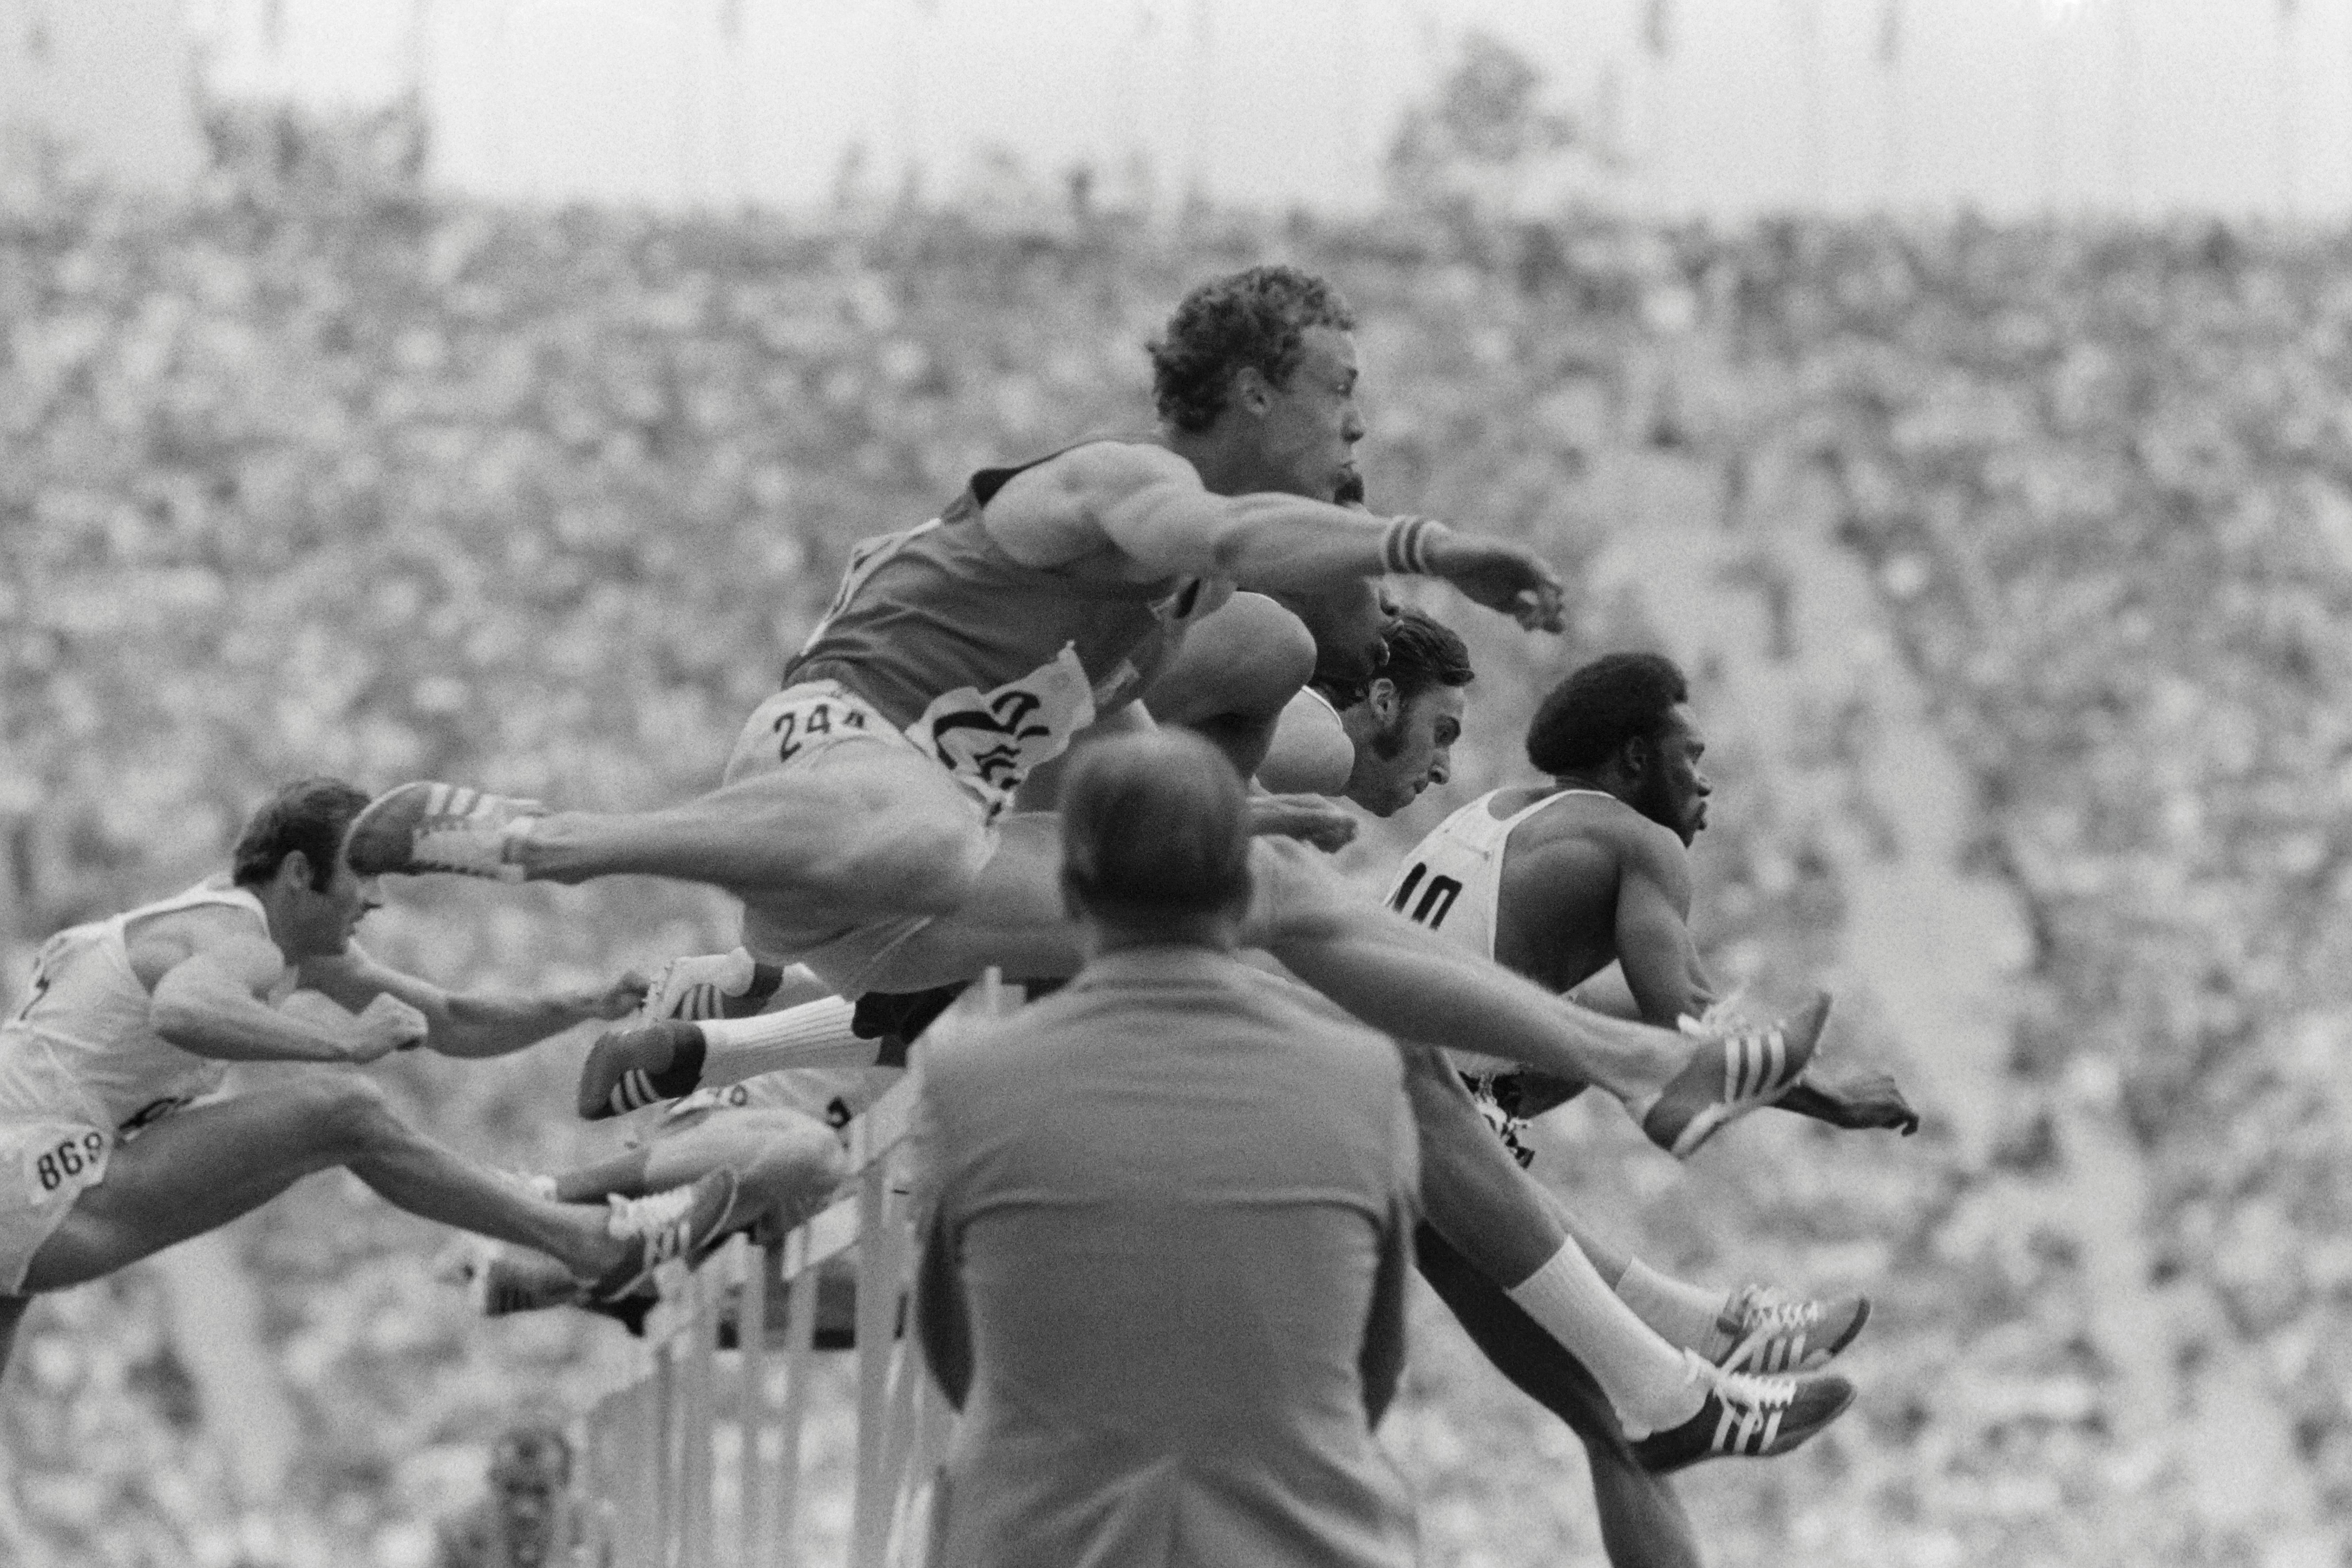 Rod Milburn leads the 110m hurdles at the 1972 Olympics in Munich